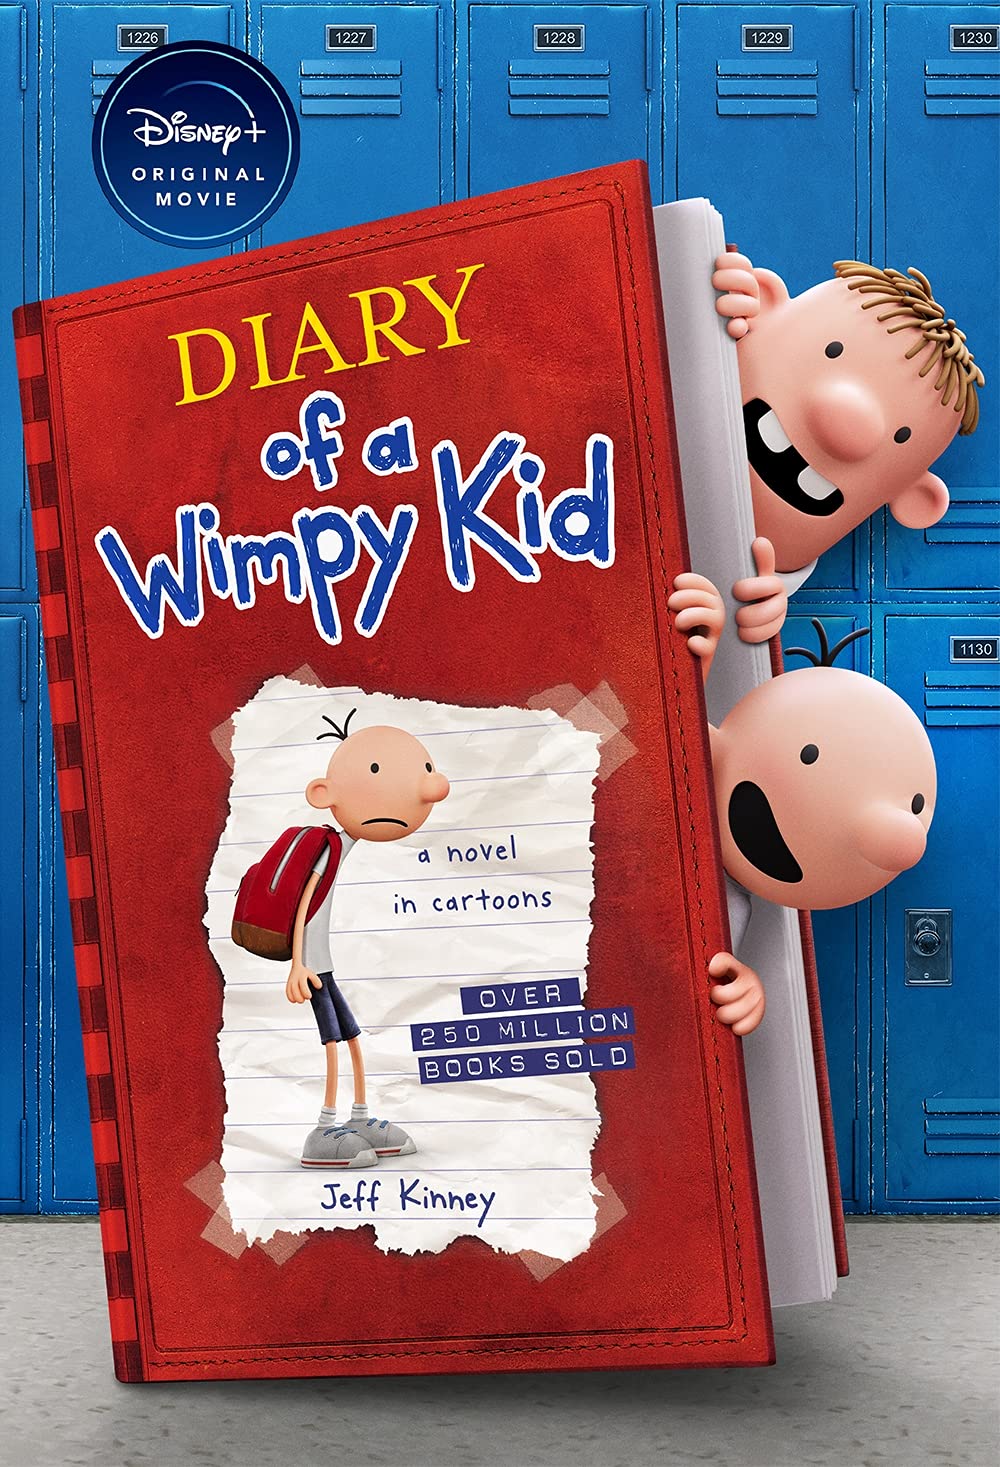 Diary Of A Wimpy Kid - Book 1: Special Disney+ Cover Edition